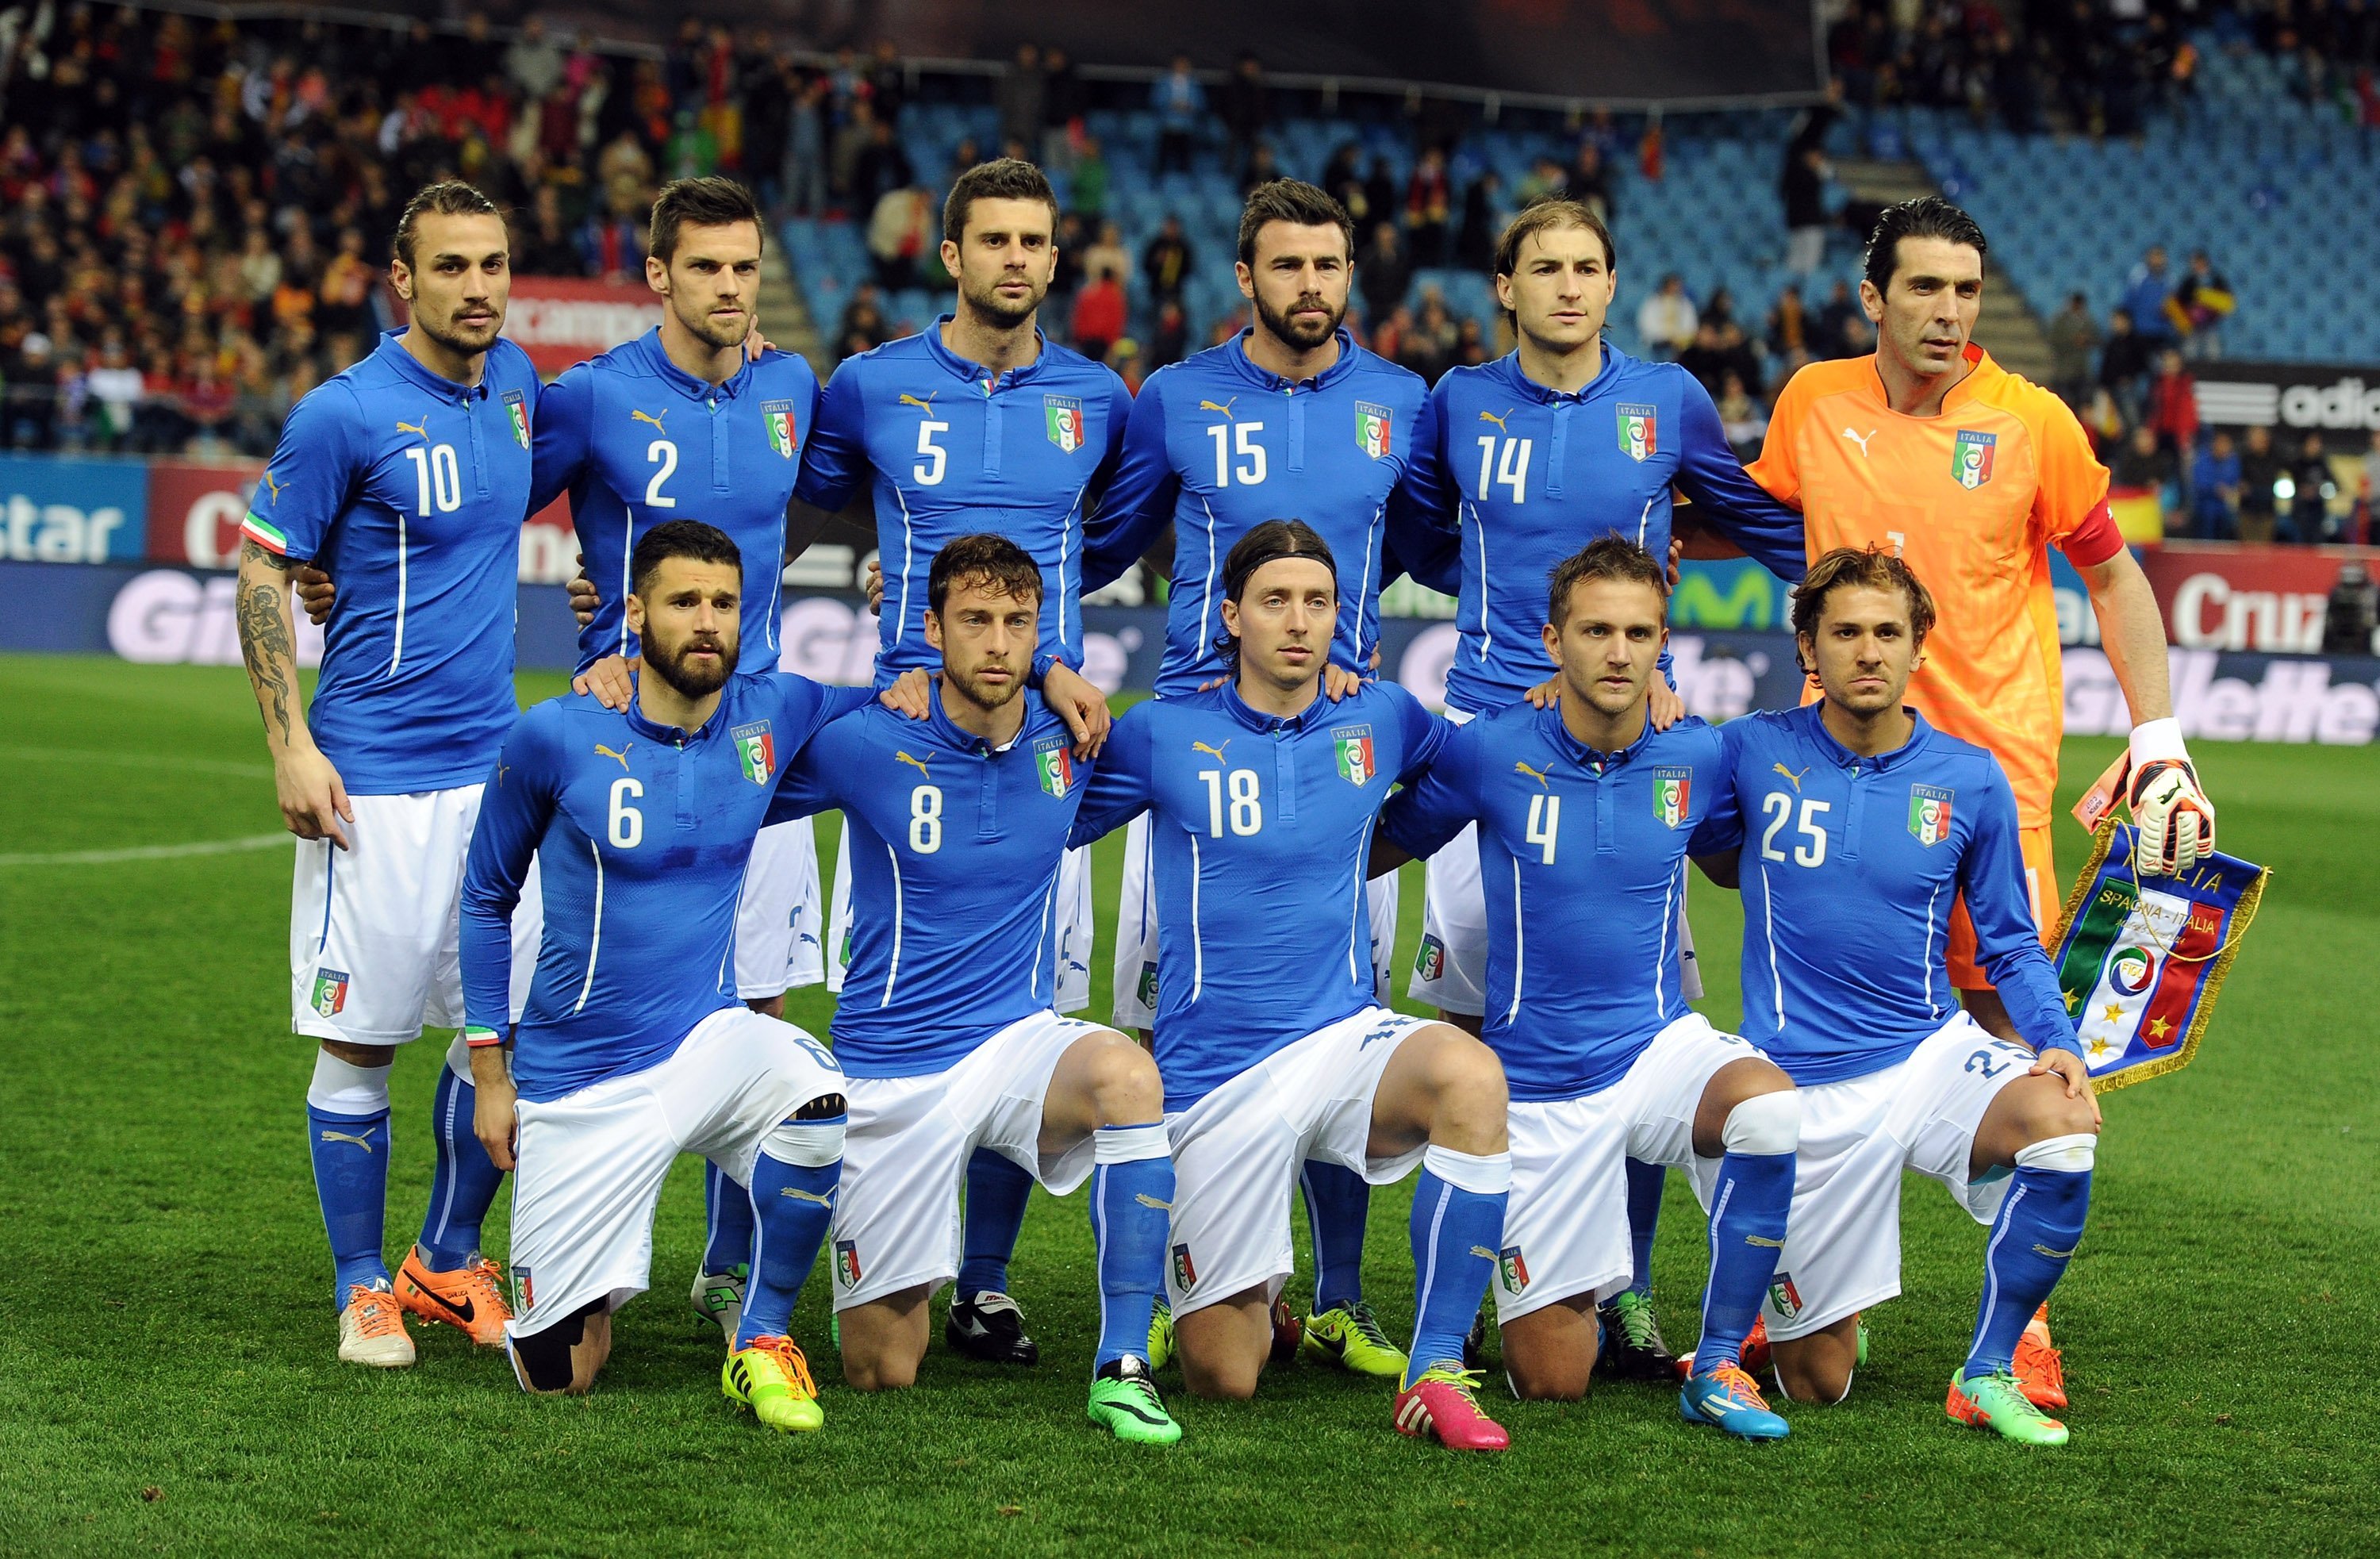 fifa, Italy, World, Cup, Soccer, Italian, 26 Wallpapers HD / Desktop and Mobile Backgrounds